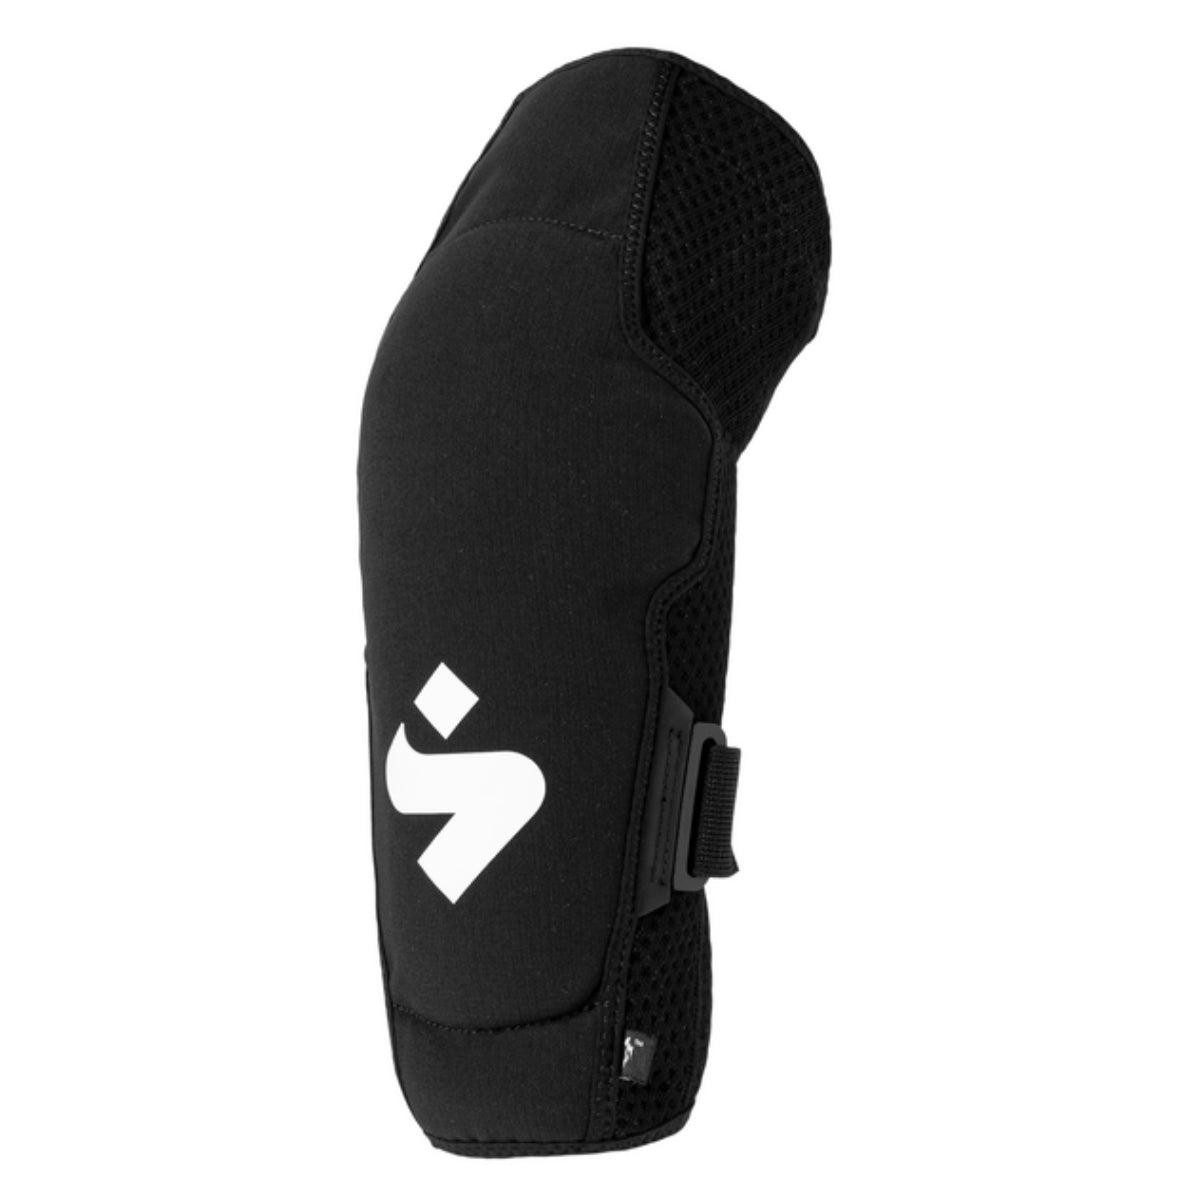 Sweet Protection - Knee Guards Pro - Black